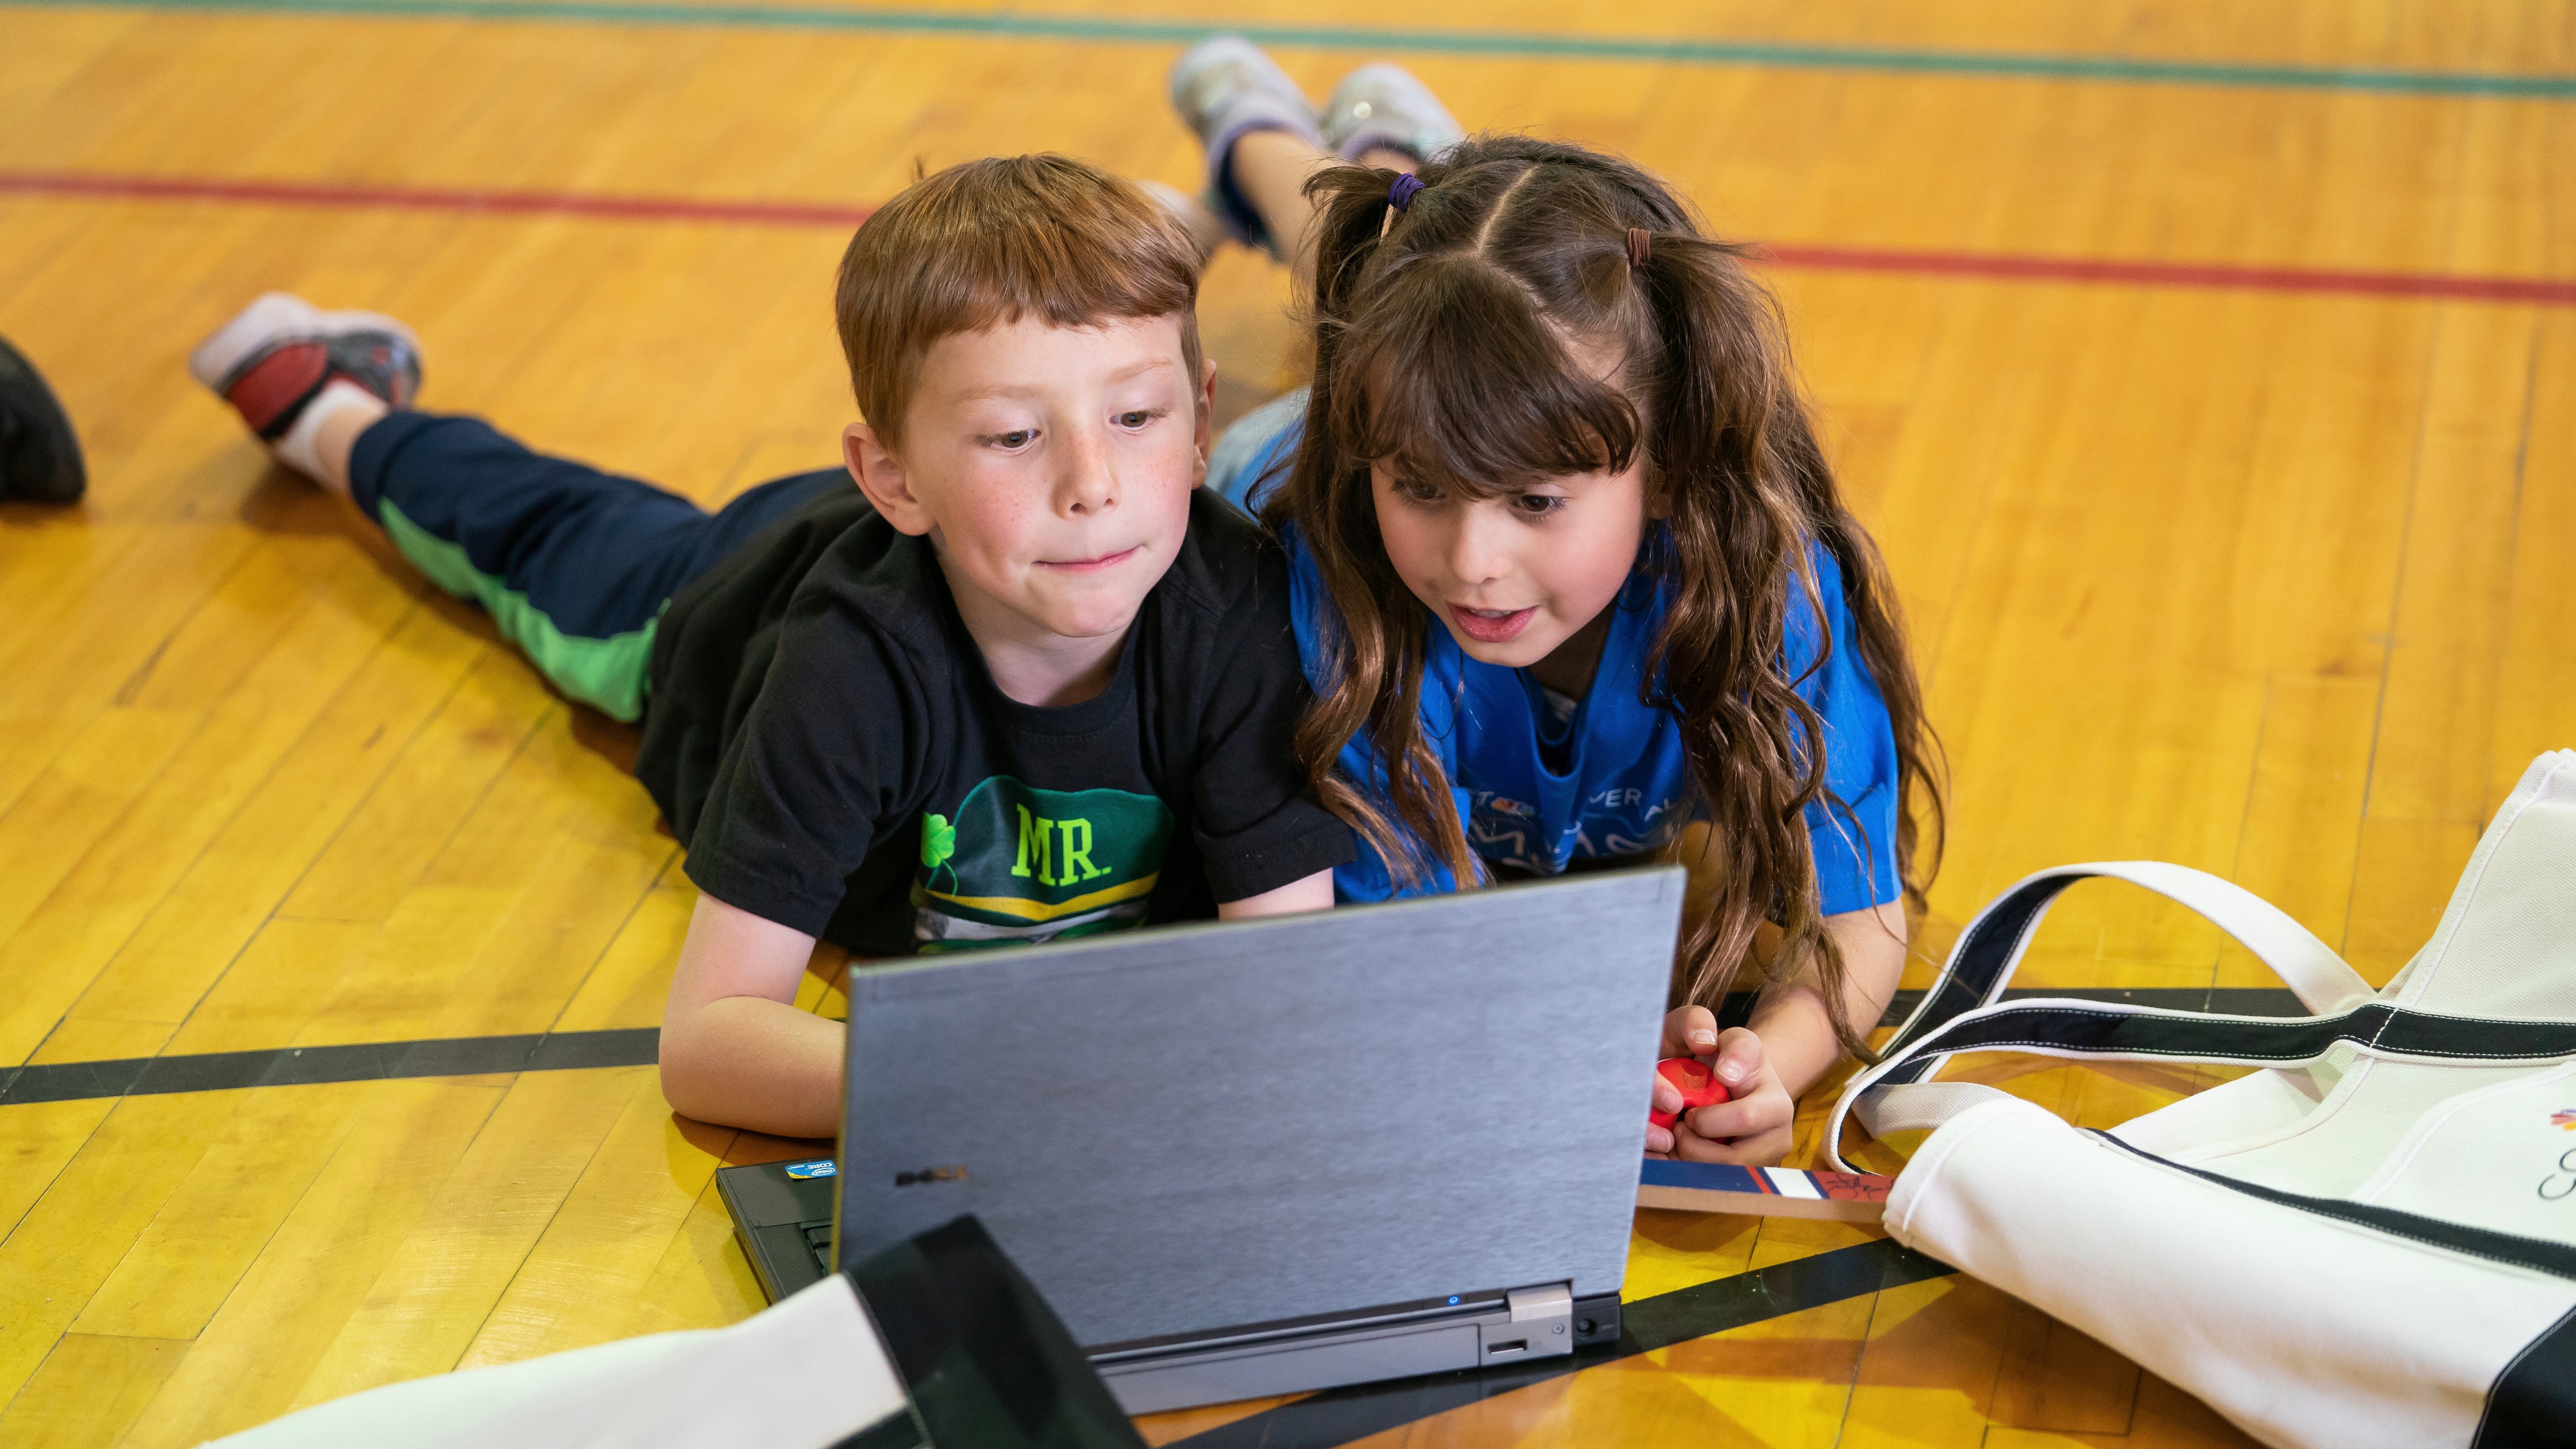 Children from the Tutt Boys & Girls Club of the Pikes Peak Region lay on the floor and use a laptop together.